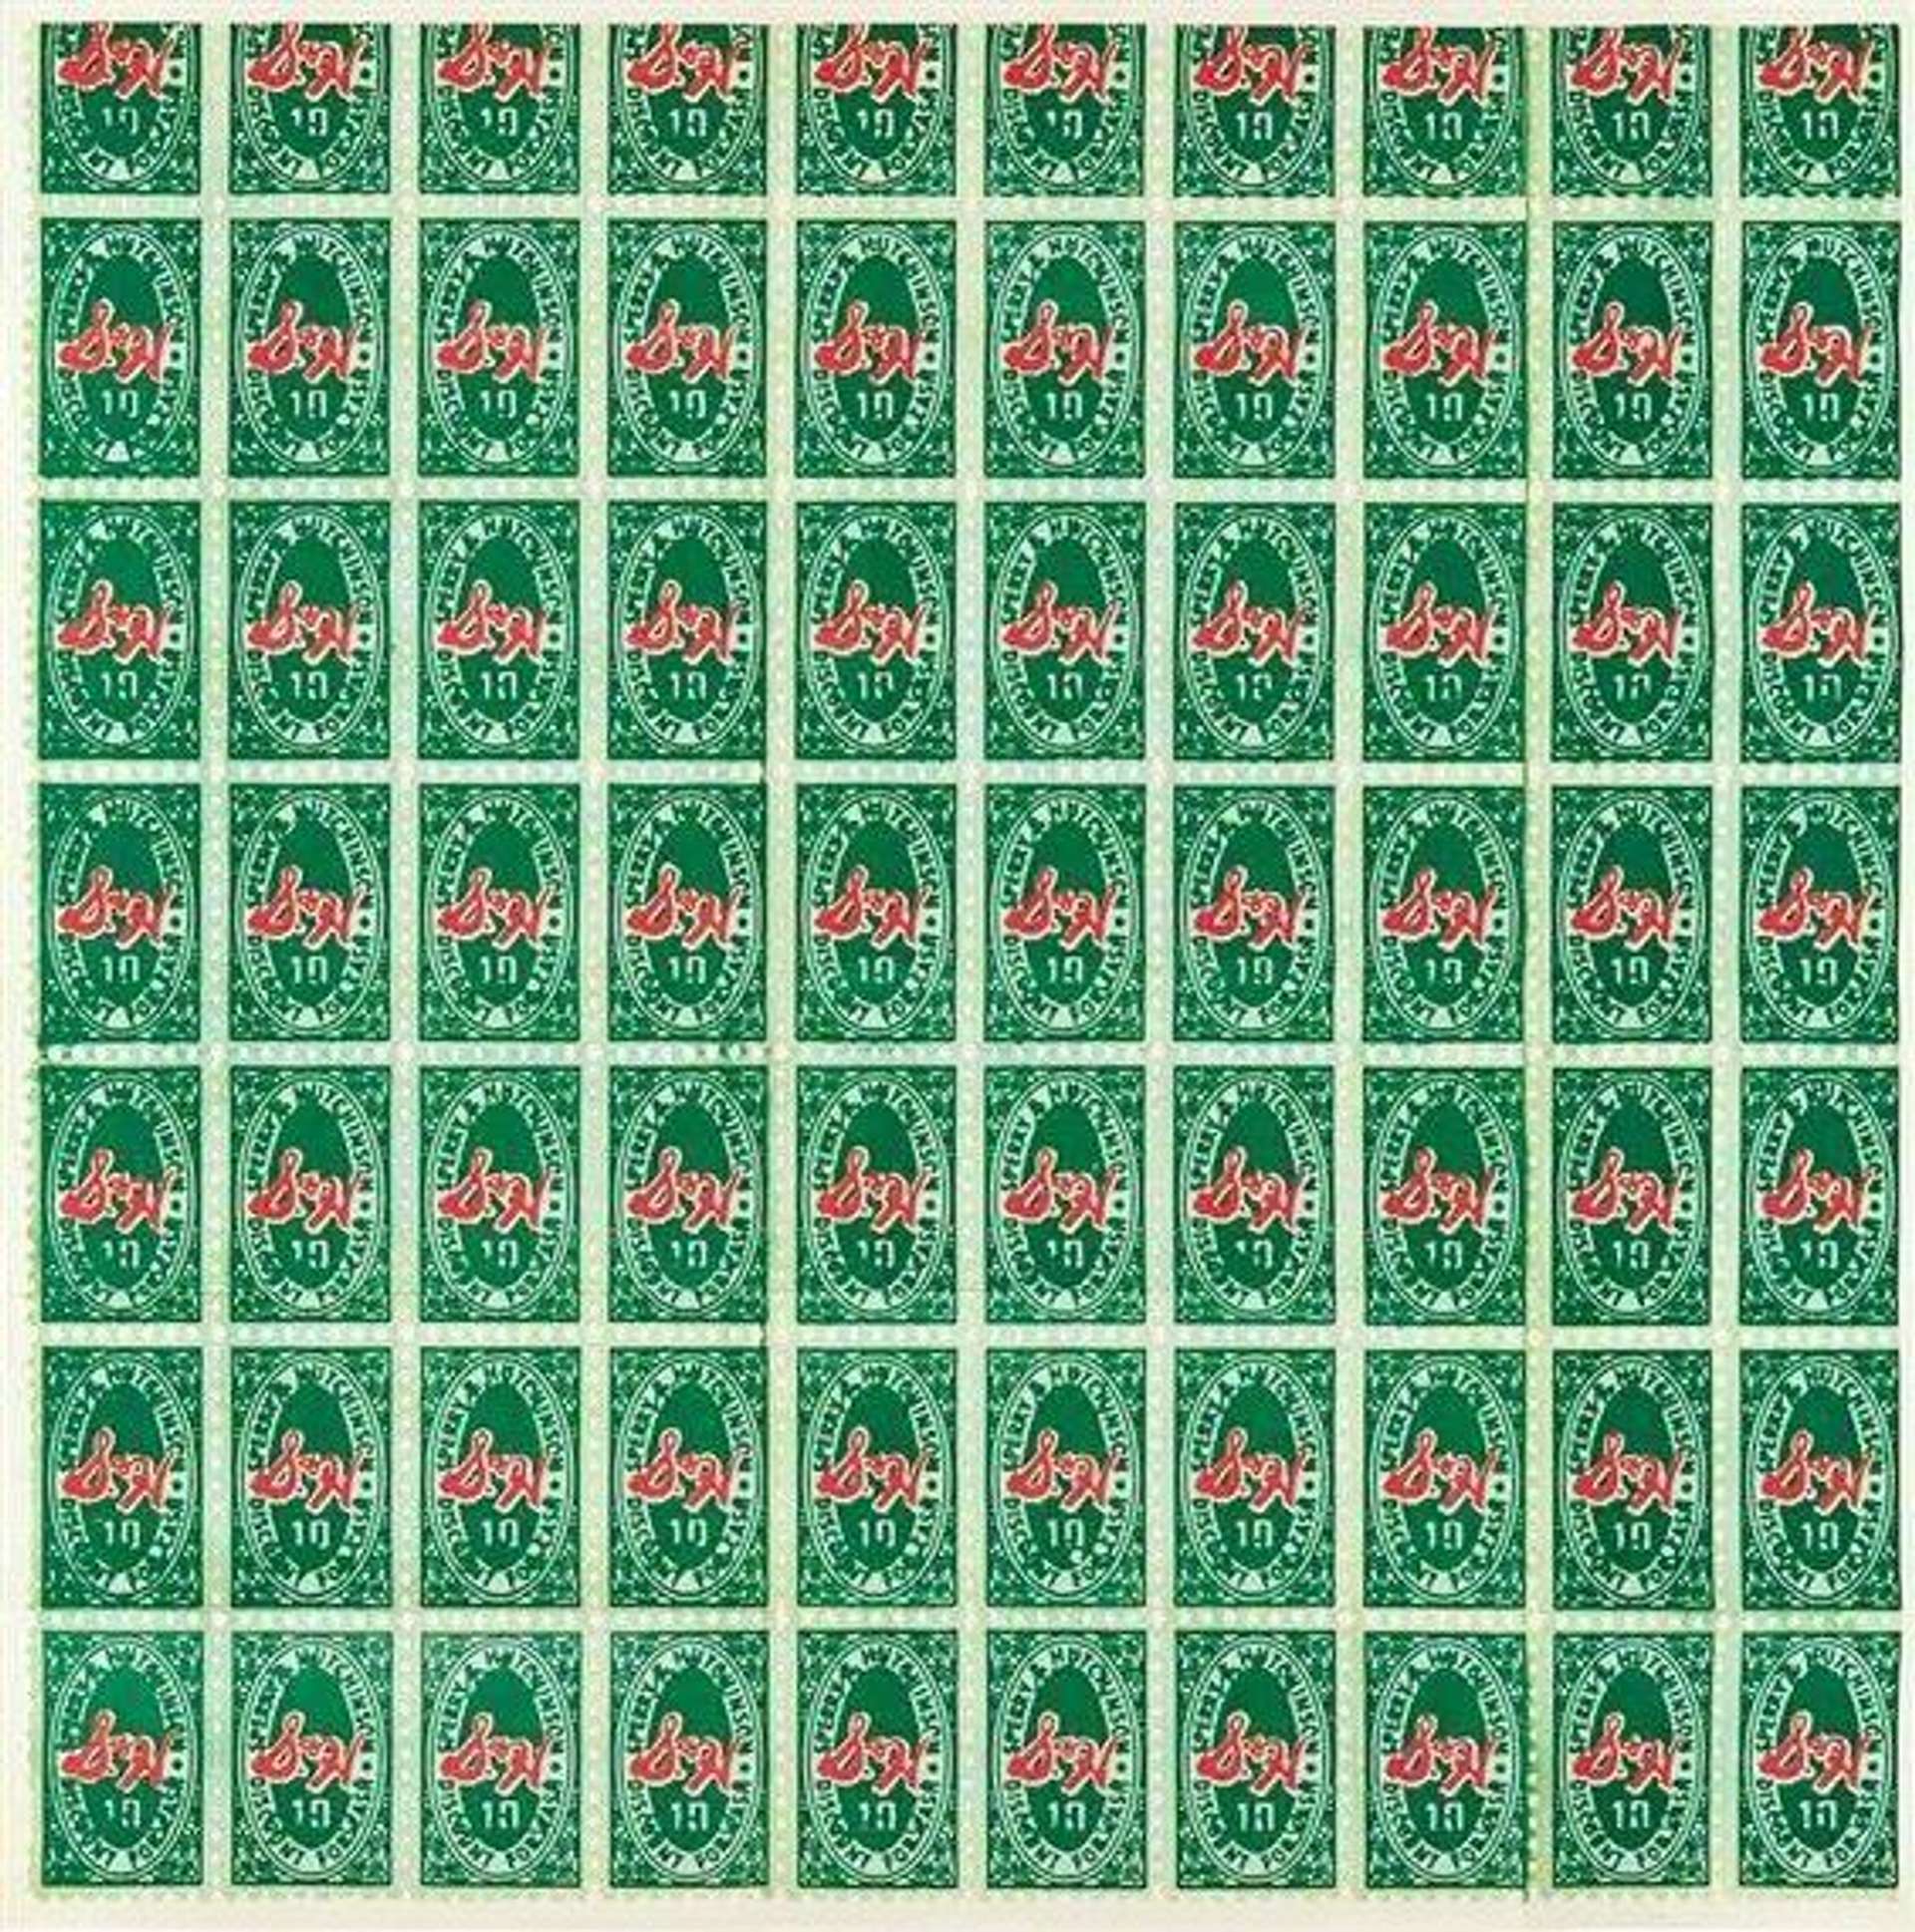 S. & H Green Stamps (F. & S. II.9) features an image of the S & H Green Stamp trading coupon repeated in a serial fashion across the entire picture plane.